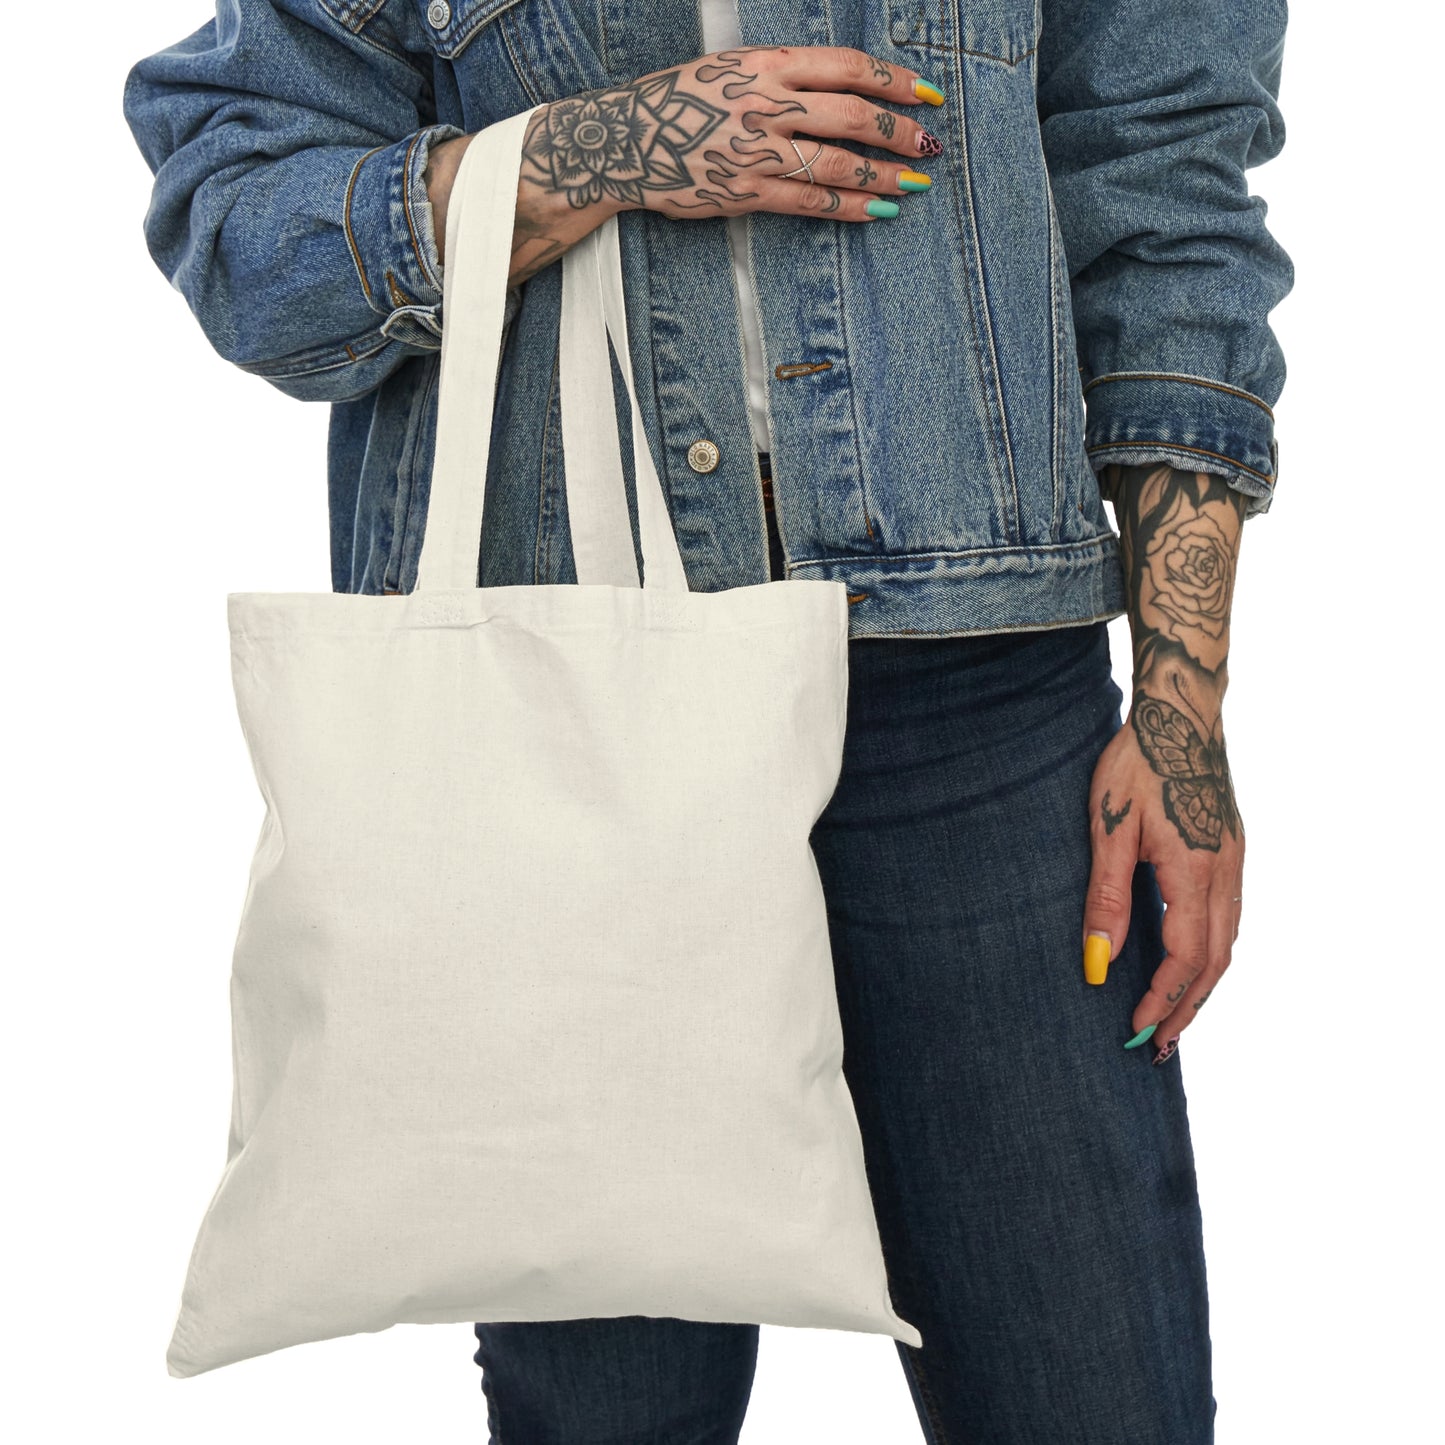 Cause And Effect - Natural Tote Bag